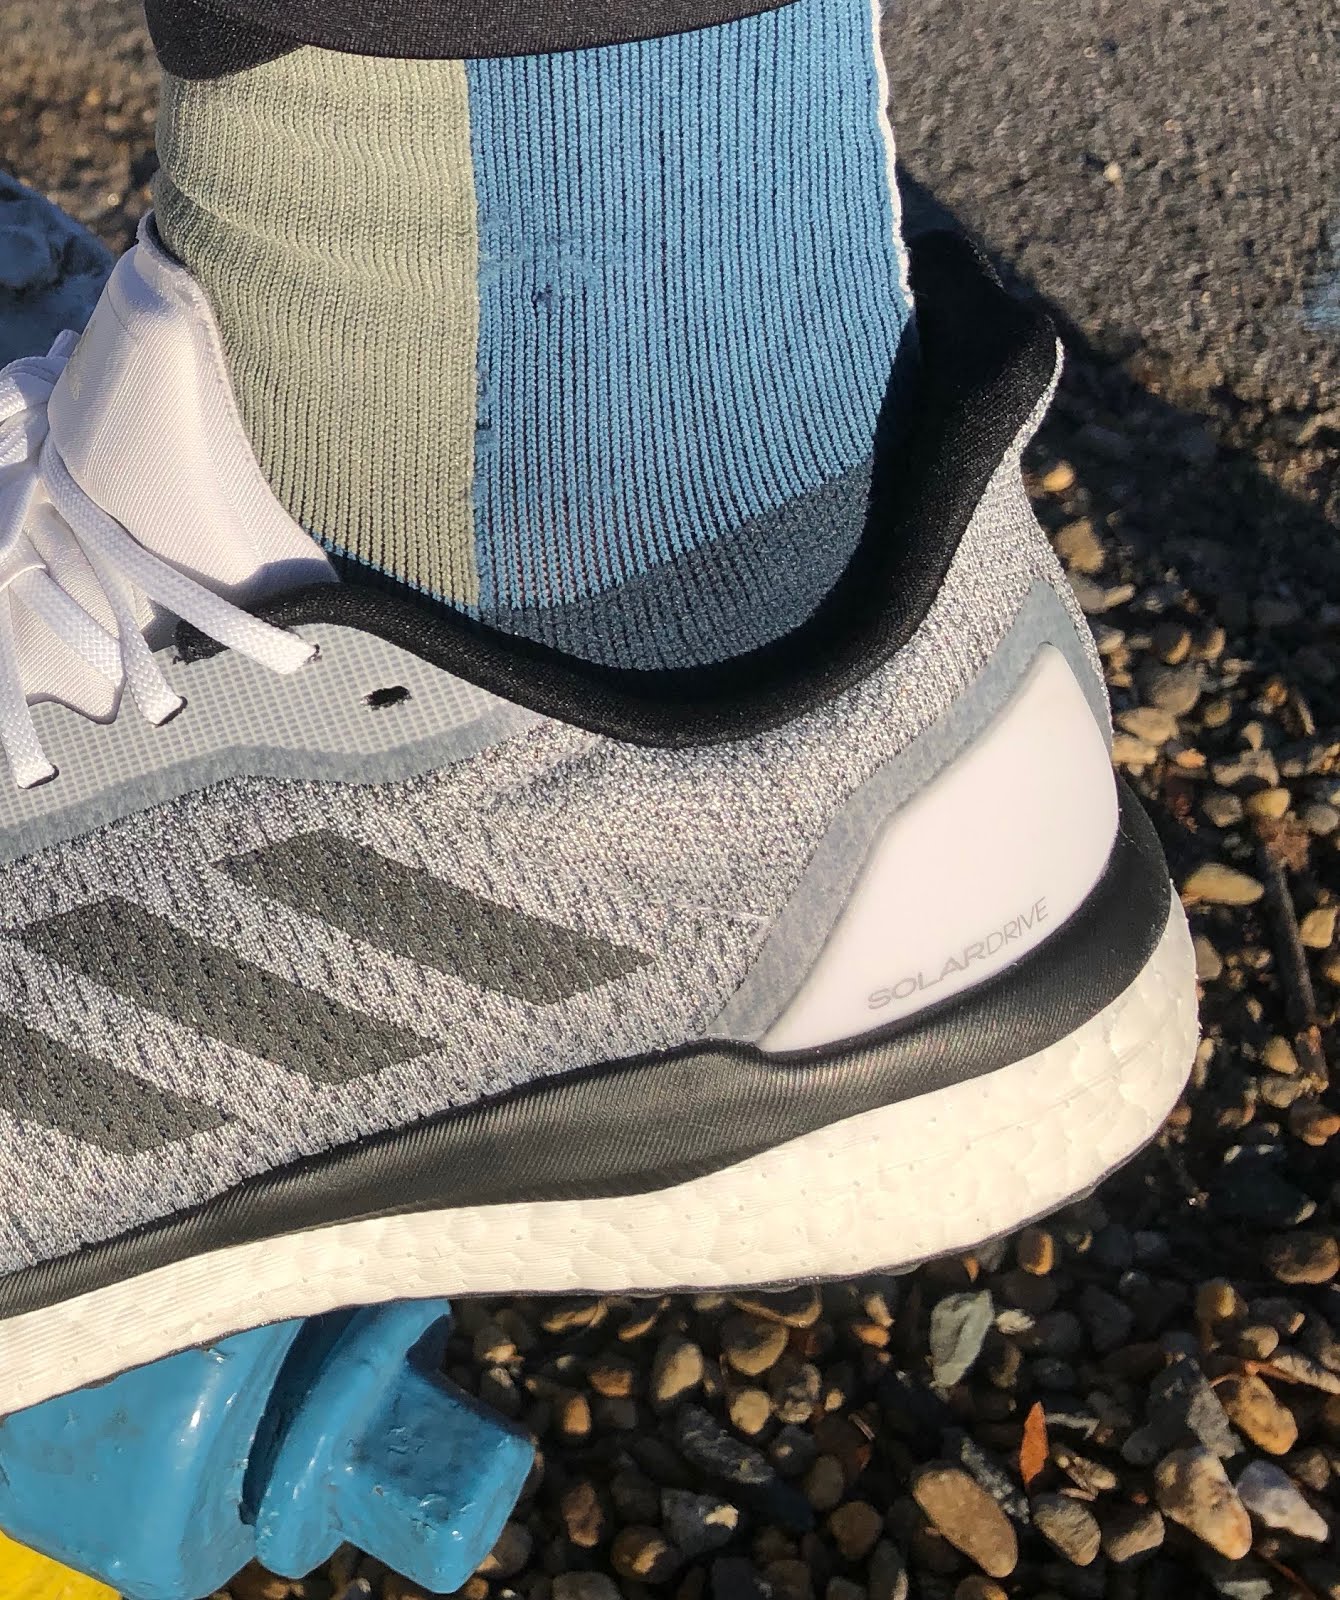 Glimpse Advanced novel Road Trail Run: adidas Solar Drive Review: Durable, Soft and Easy Trainer  with a Cage Free Upper Gets the Job Done